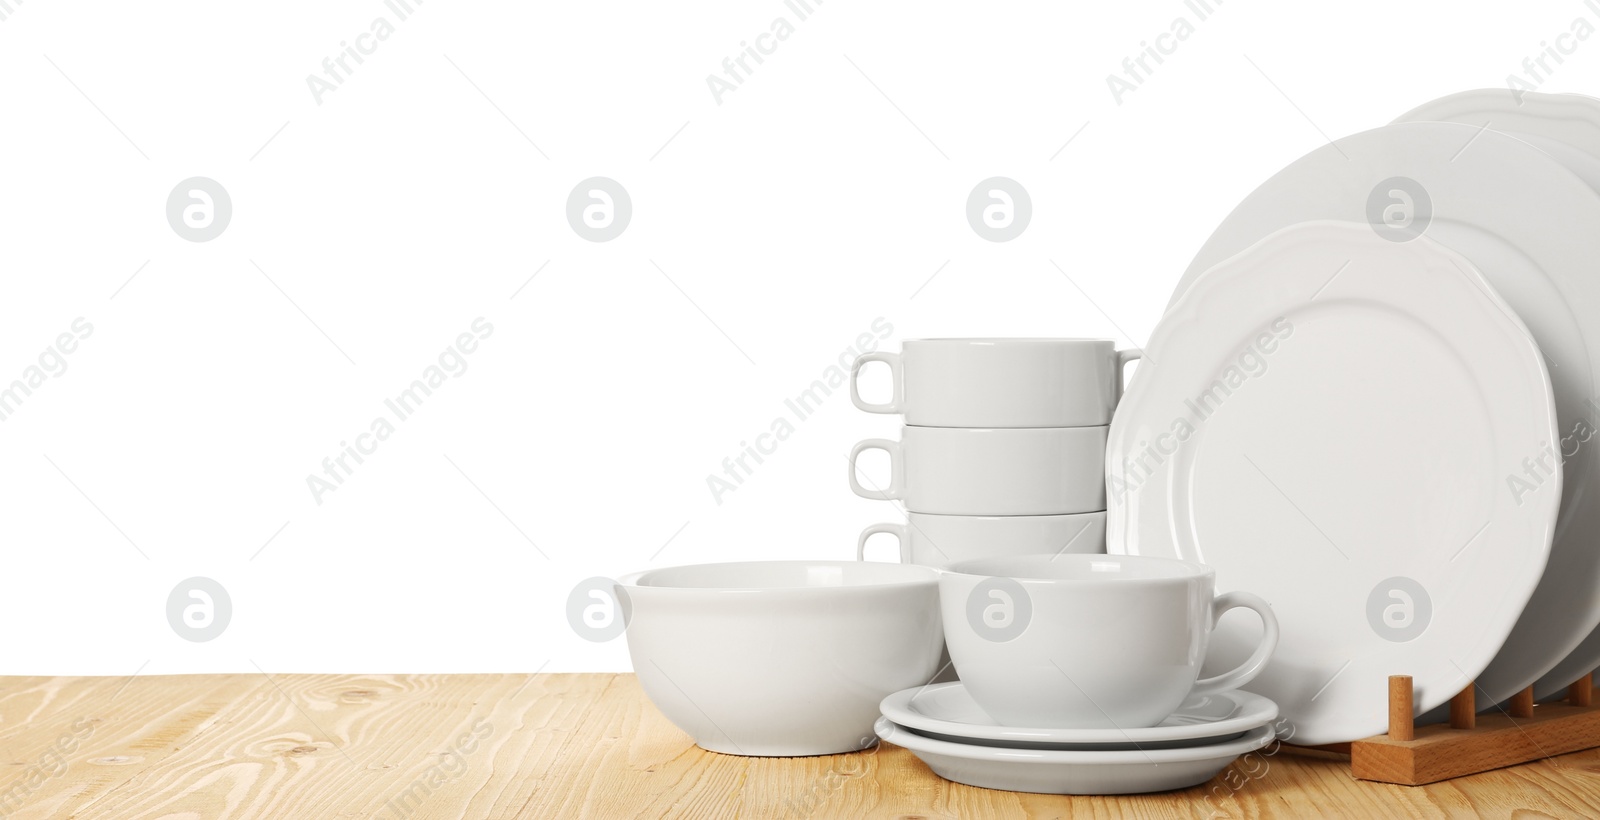 Photo of Set of different clean dishware on wooden table against white background